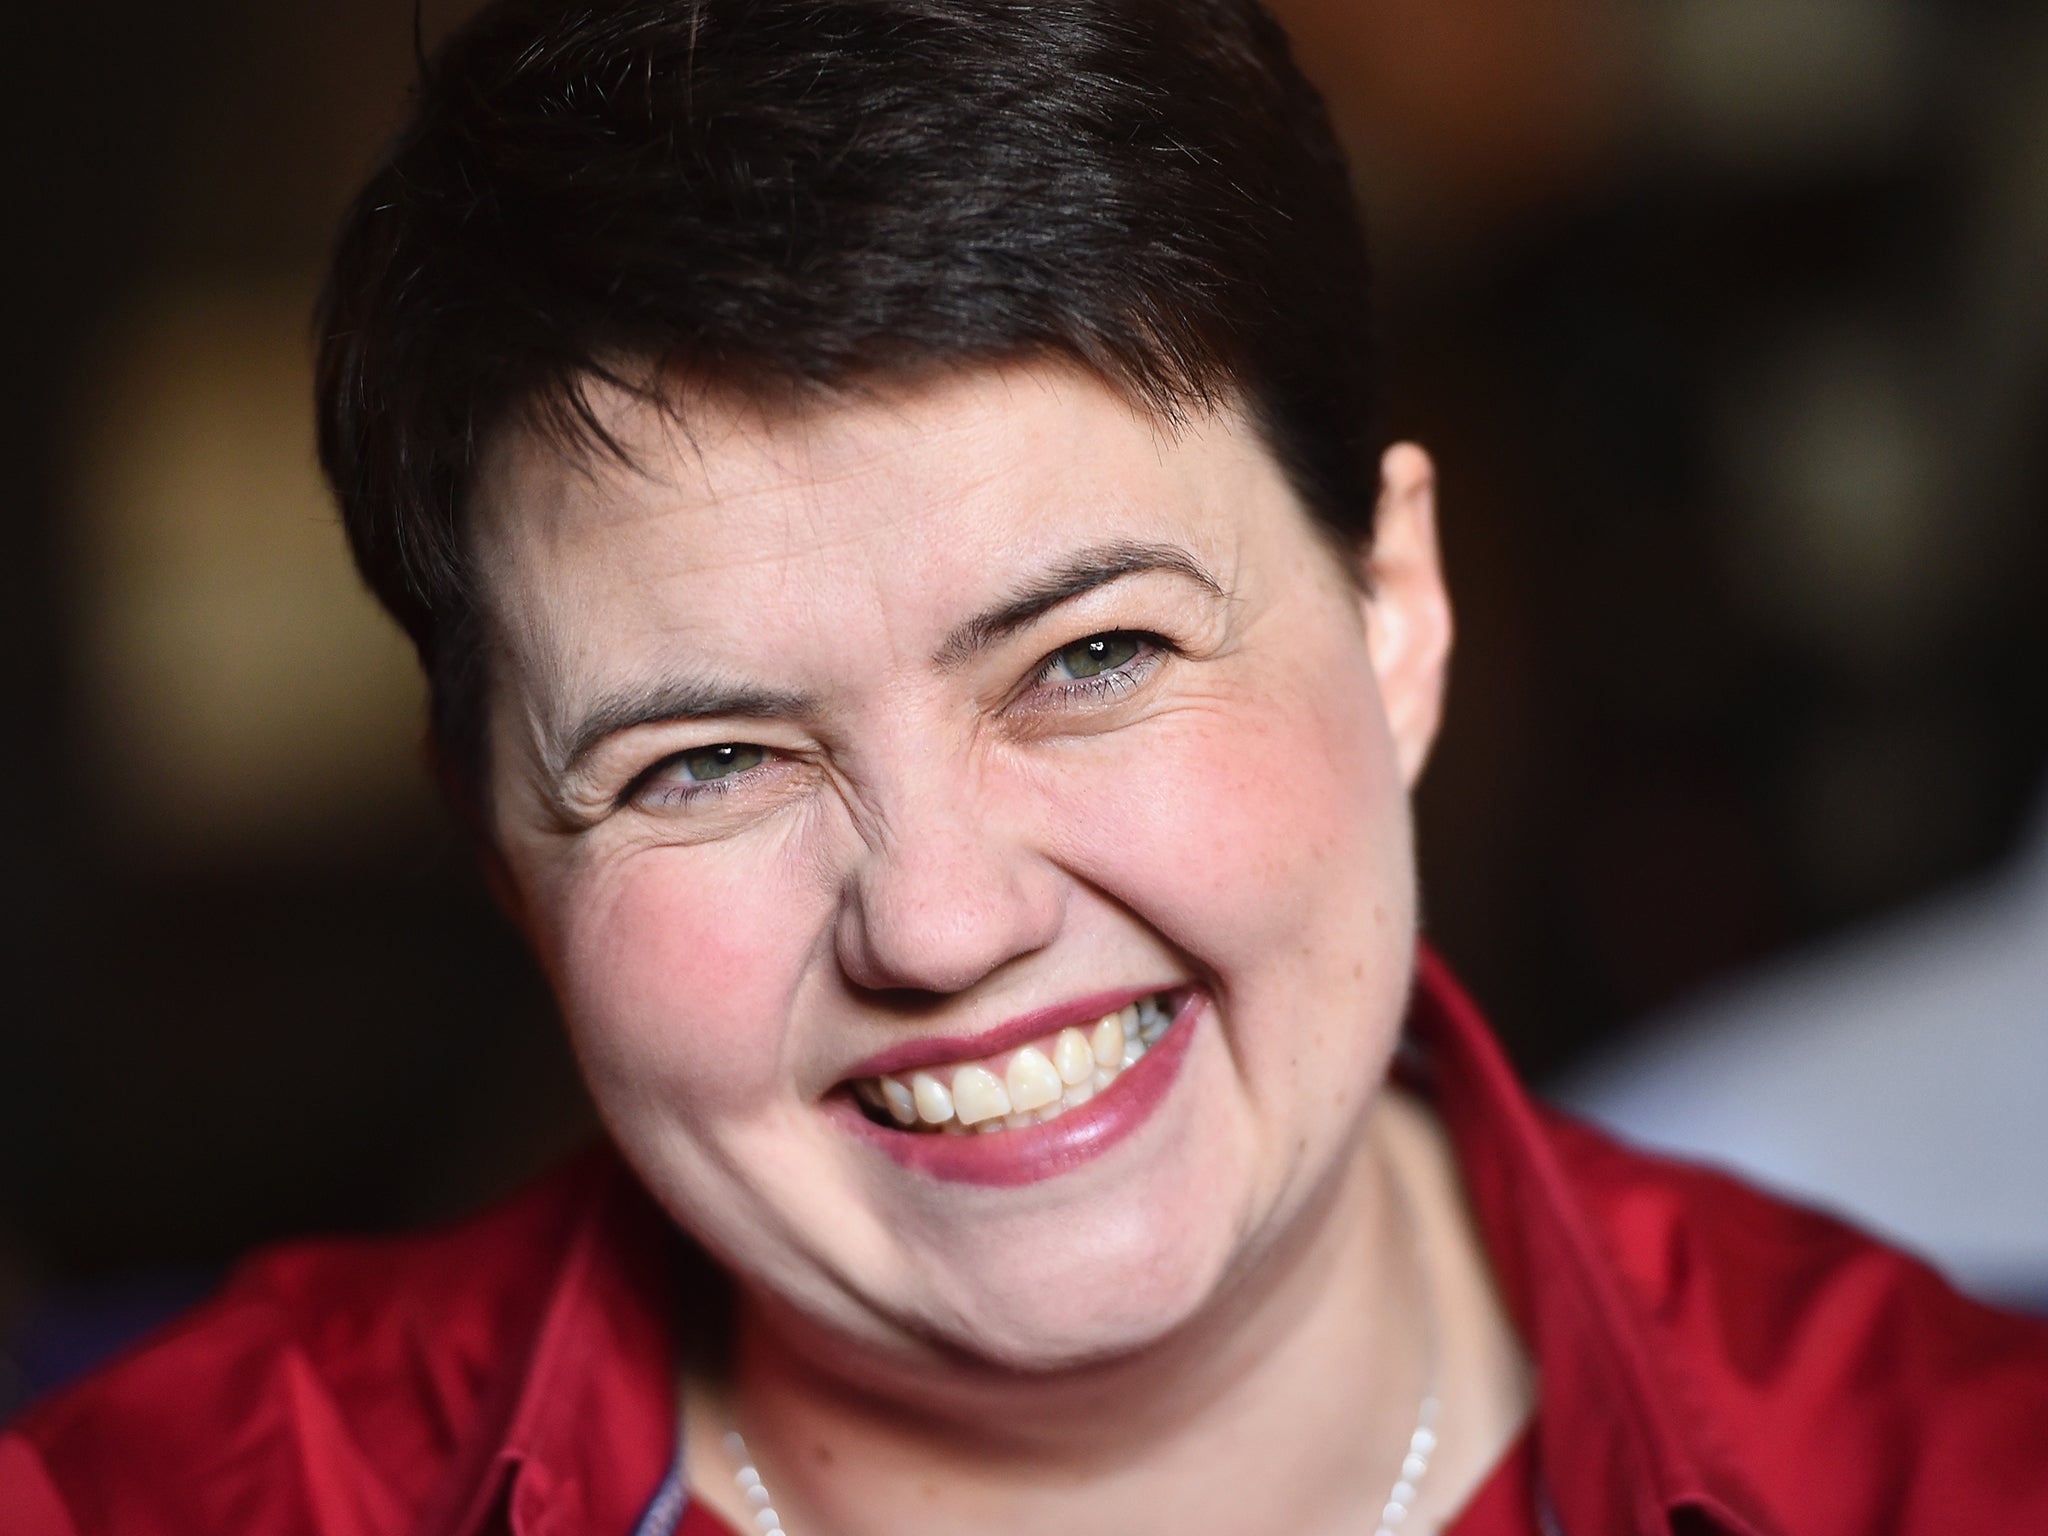 The news follows Ms Davidson’s recent rise to victory iIn the local elections where she pushed Labour into third place in Scotland